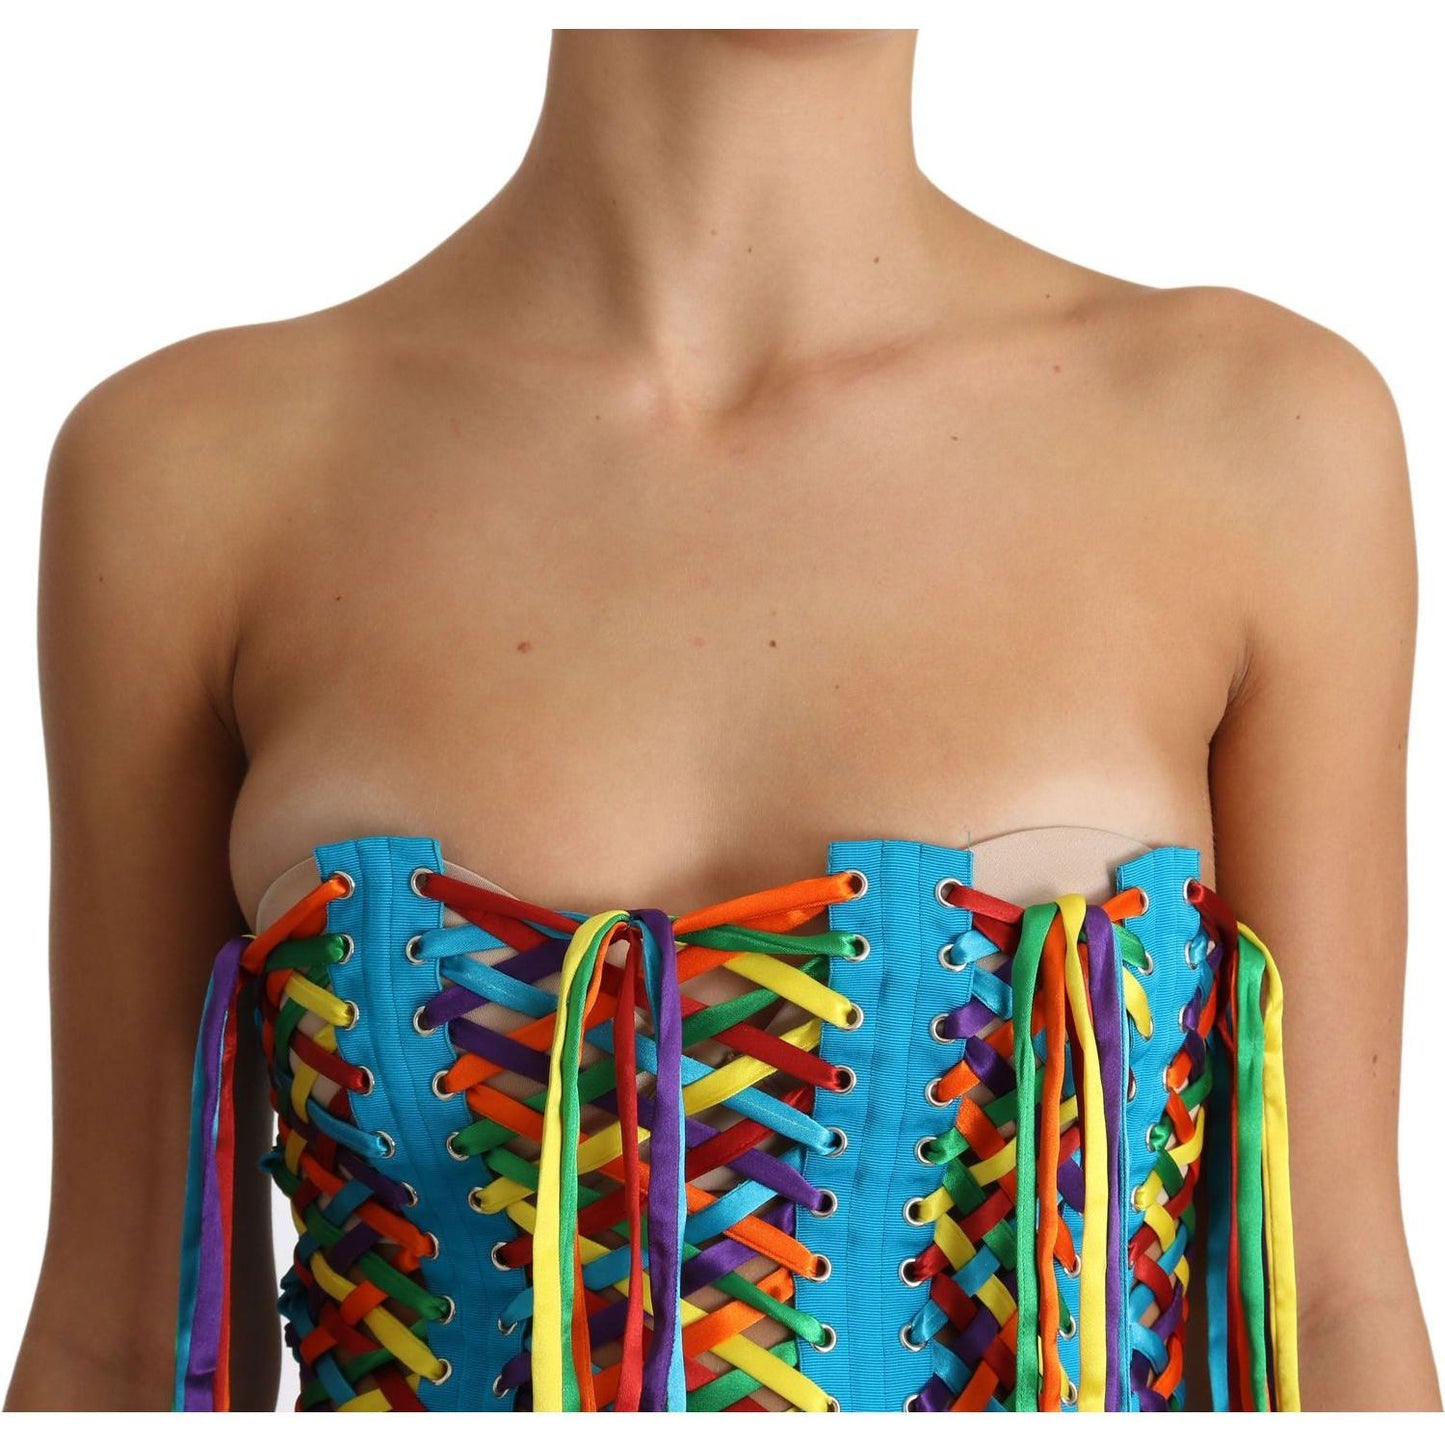 Dolce & Gabbana Multicolor Strapless Bustier Corset Top multicolor-strings-bustier-polyester-corset-top